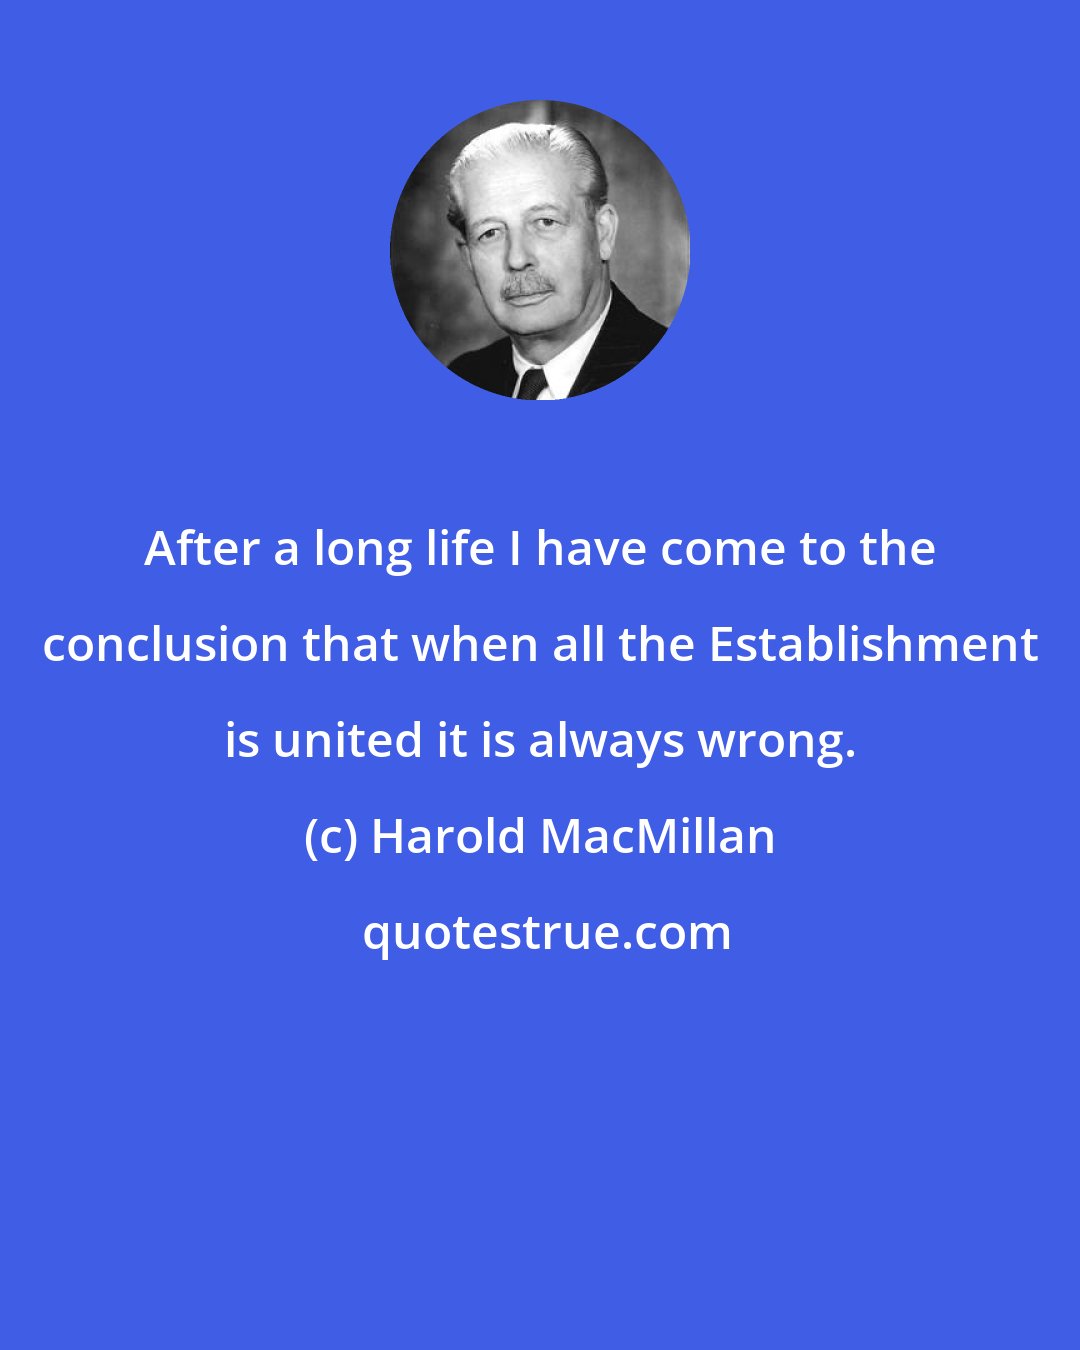 Harold MacMillan: After a long life I have come to the conclusion that when all the Establishment is united it is always wrong.